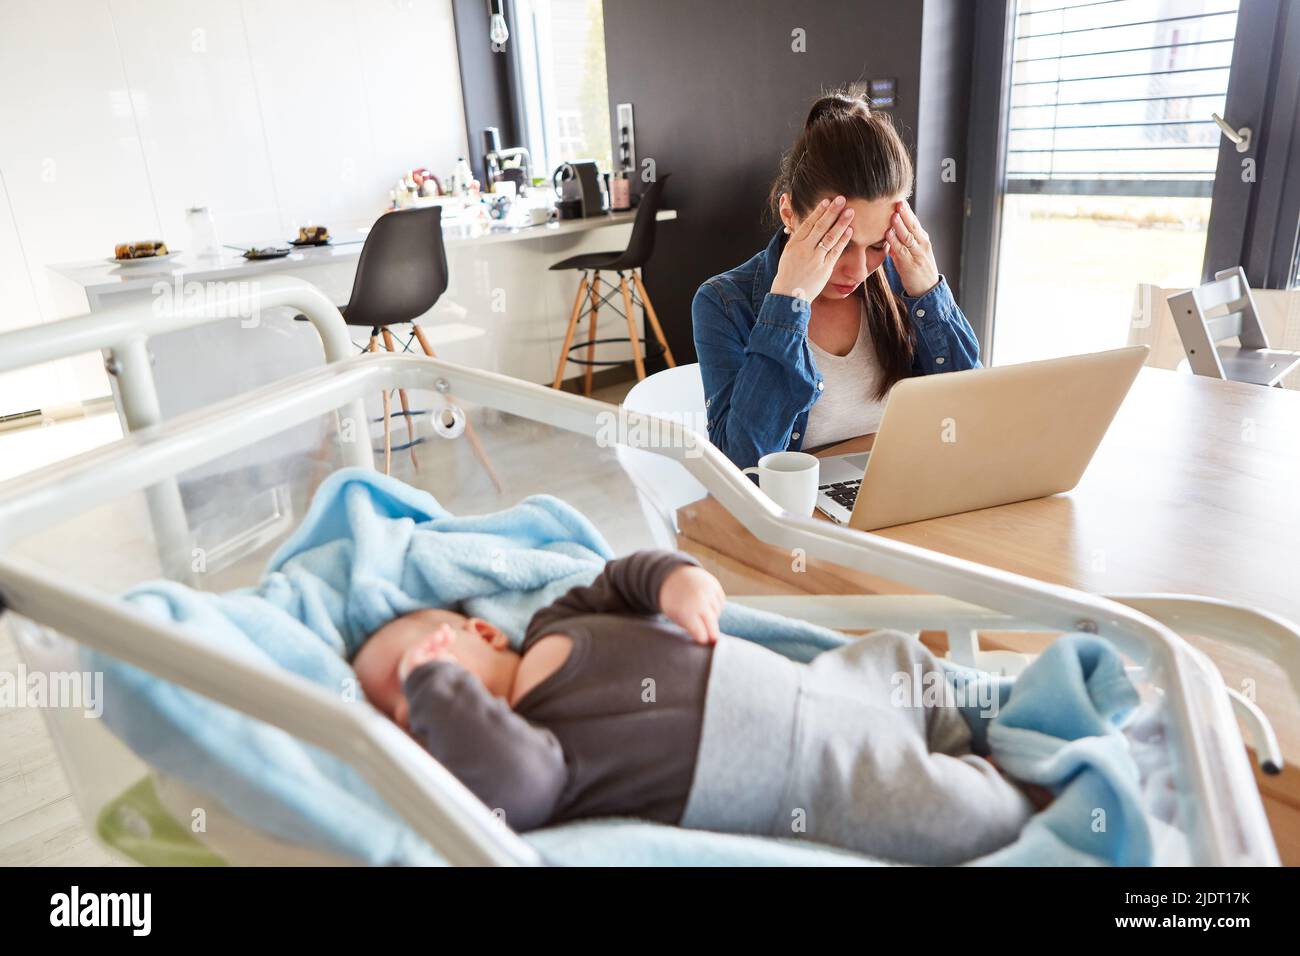 Exhausted single mother at pc in home office and sleeping baby in foreground Stock Photo